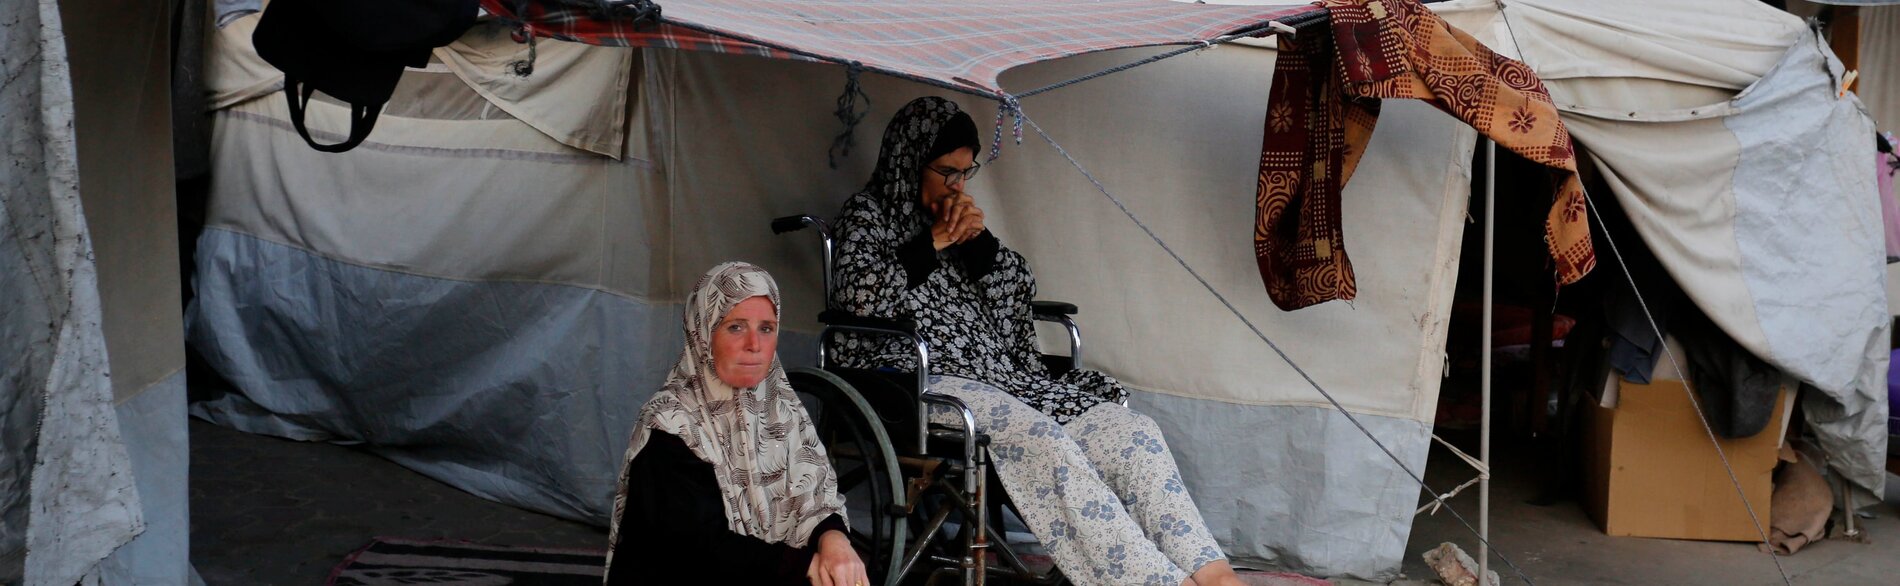 Displaced Palestinian women staying in an improvised shelter in Gaza. Photo by UNRWA 